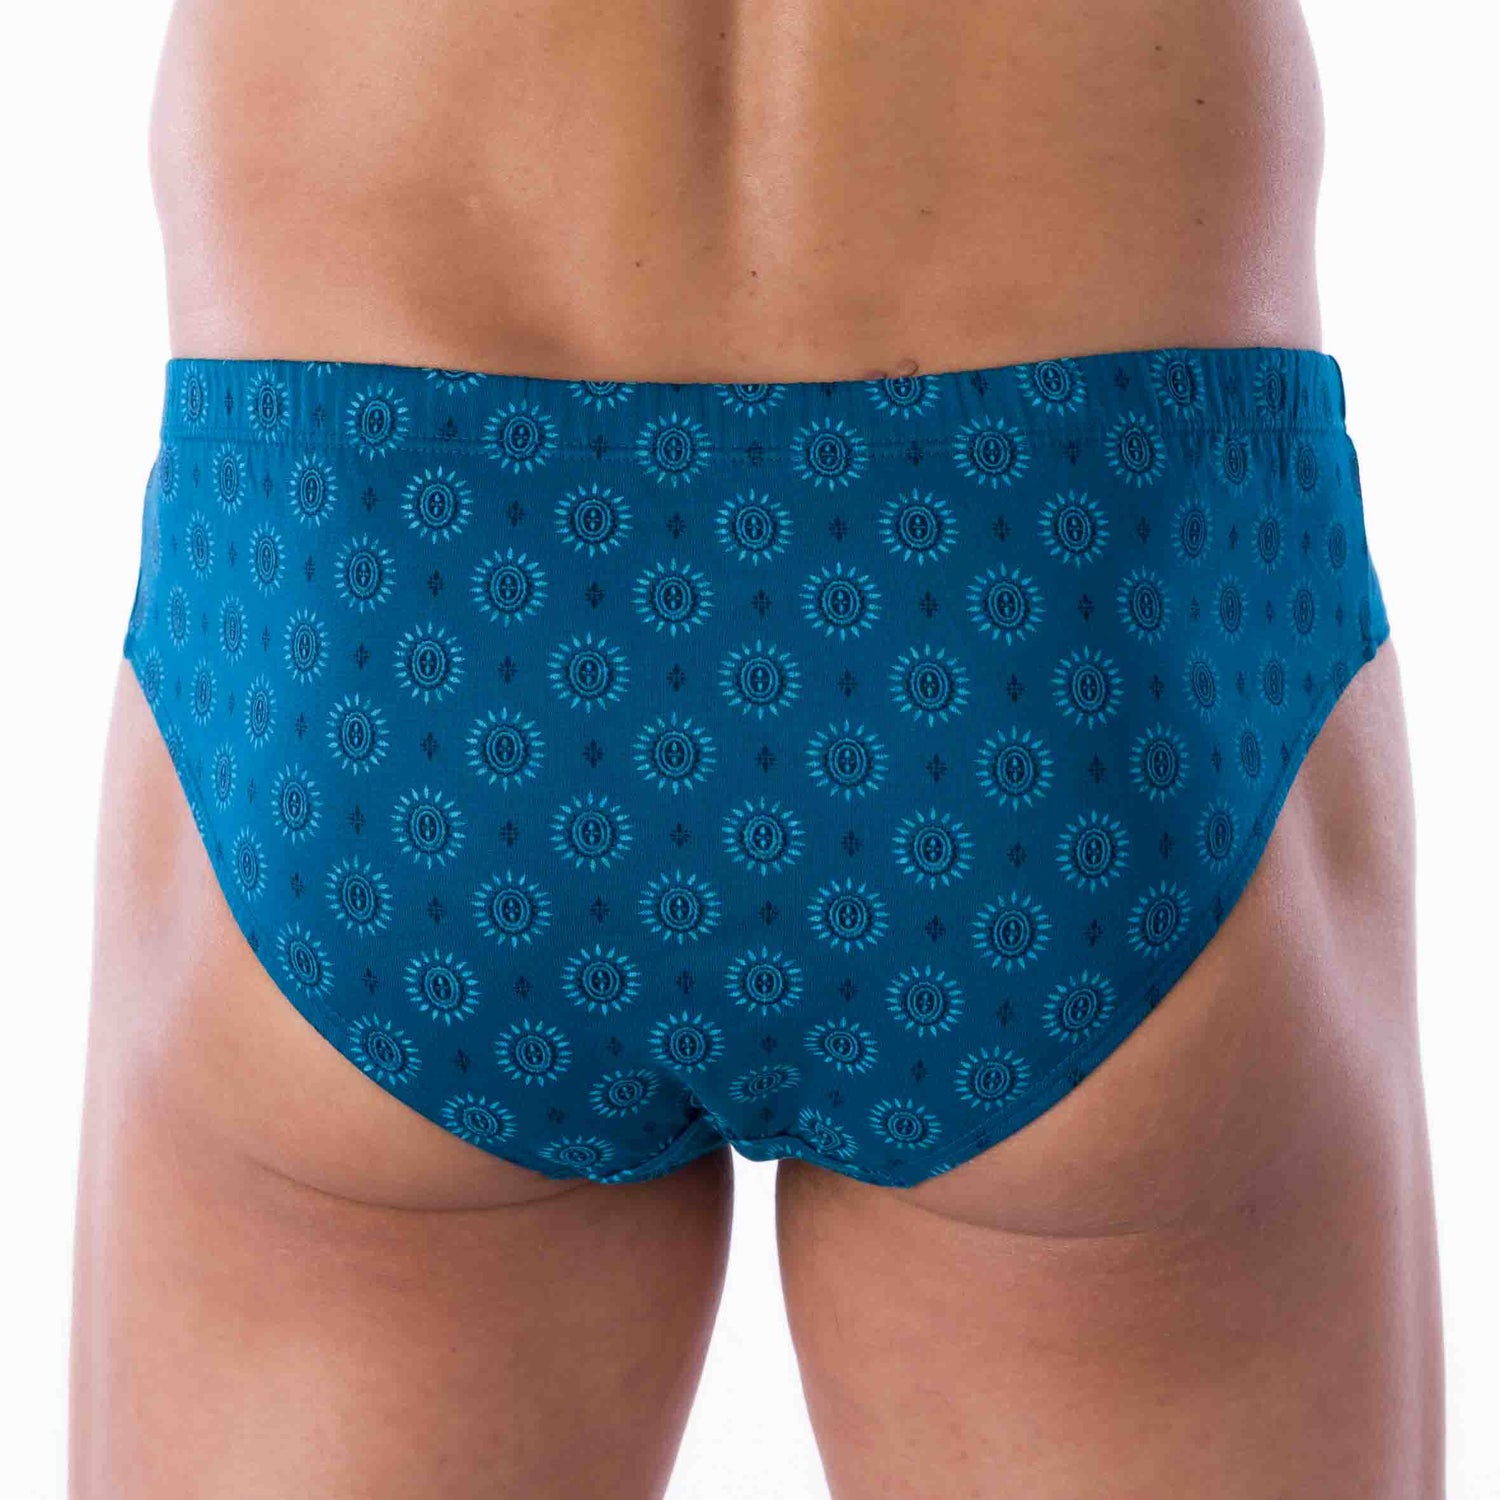 Pack of 2 Low-Rise Briefs in Petrol BLUE and NAVY Printed Mercerized Cotton Jersey